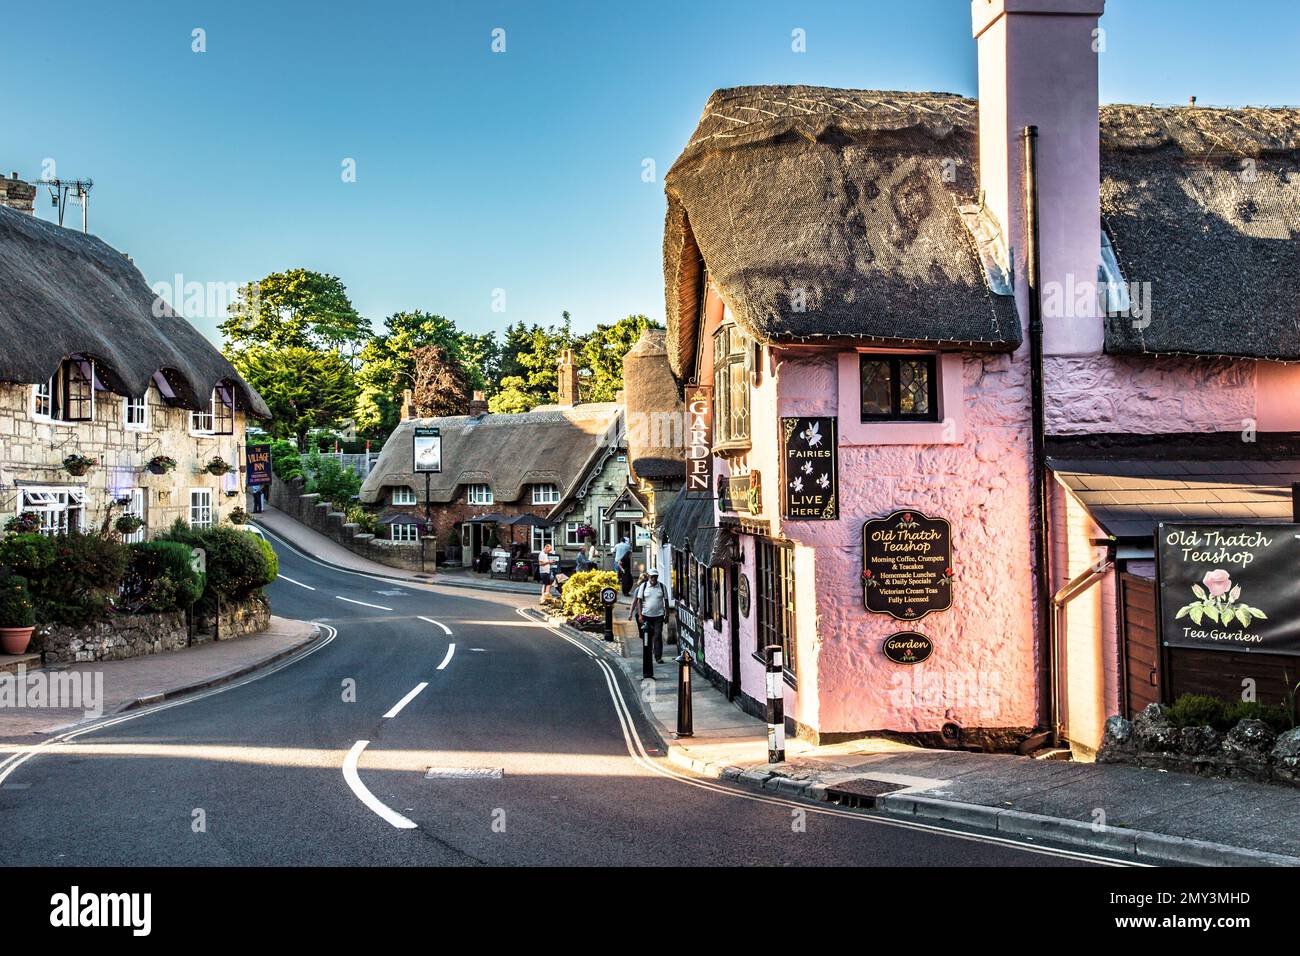 Shanklin is a traditional seaside town located on the south-east coast of the Isle of Wight. Young or old Shanklin has plenty to offer, with long sand Stock Photo